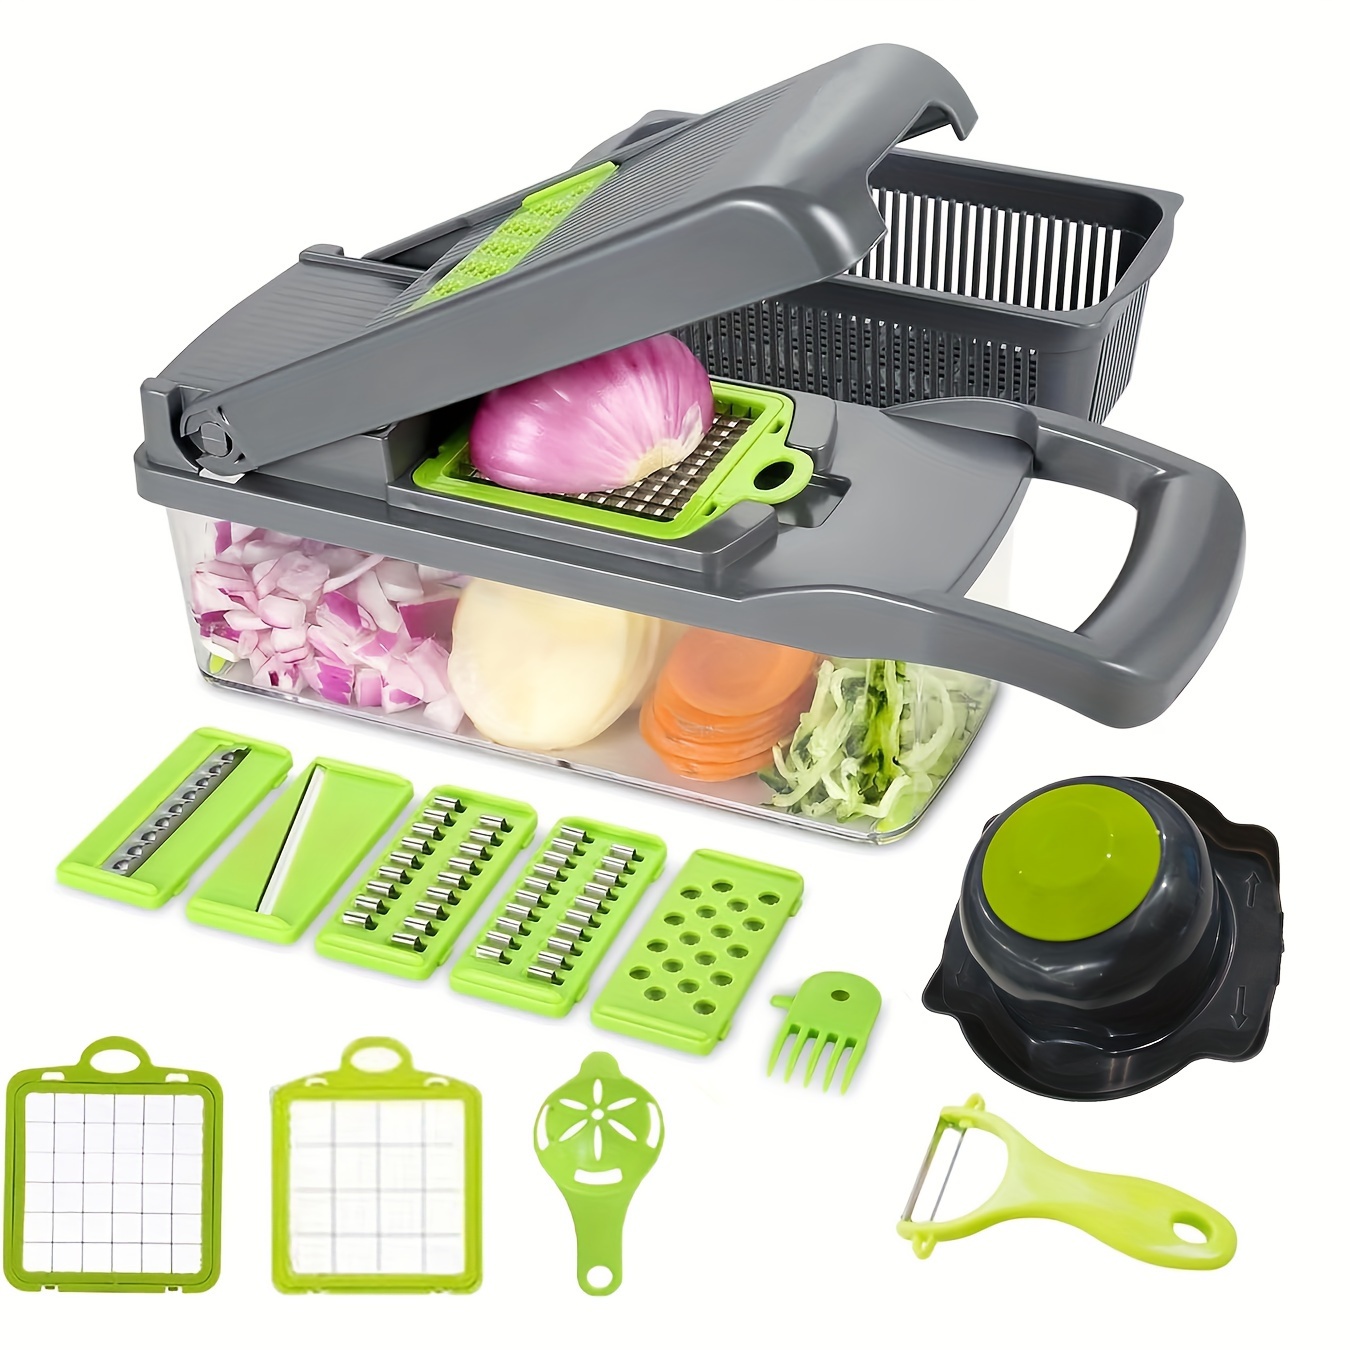 

1pc, Vegetable Chopper, Multifunctional Fruit Slicer, Manual Food Grater, Vegetable Slicer, Cutter With Container, Onion Mincer Chopper, Household Potato , Kitchen Stuff, Kitchen Gadgets